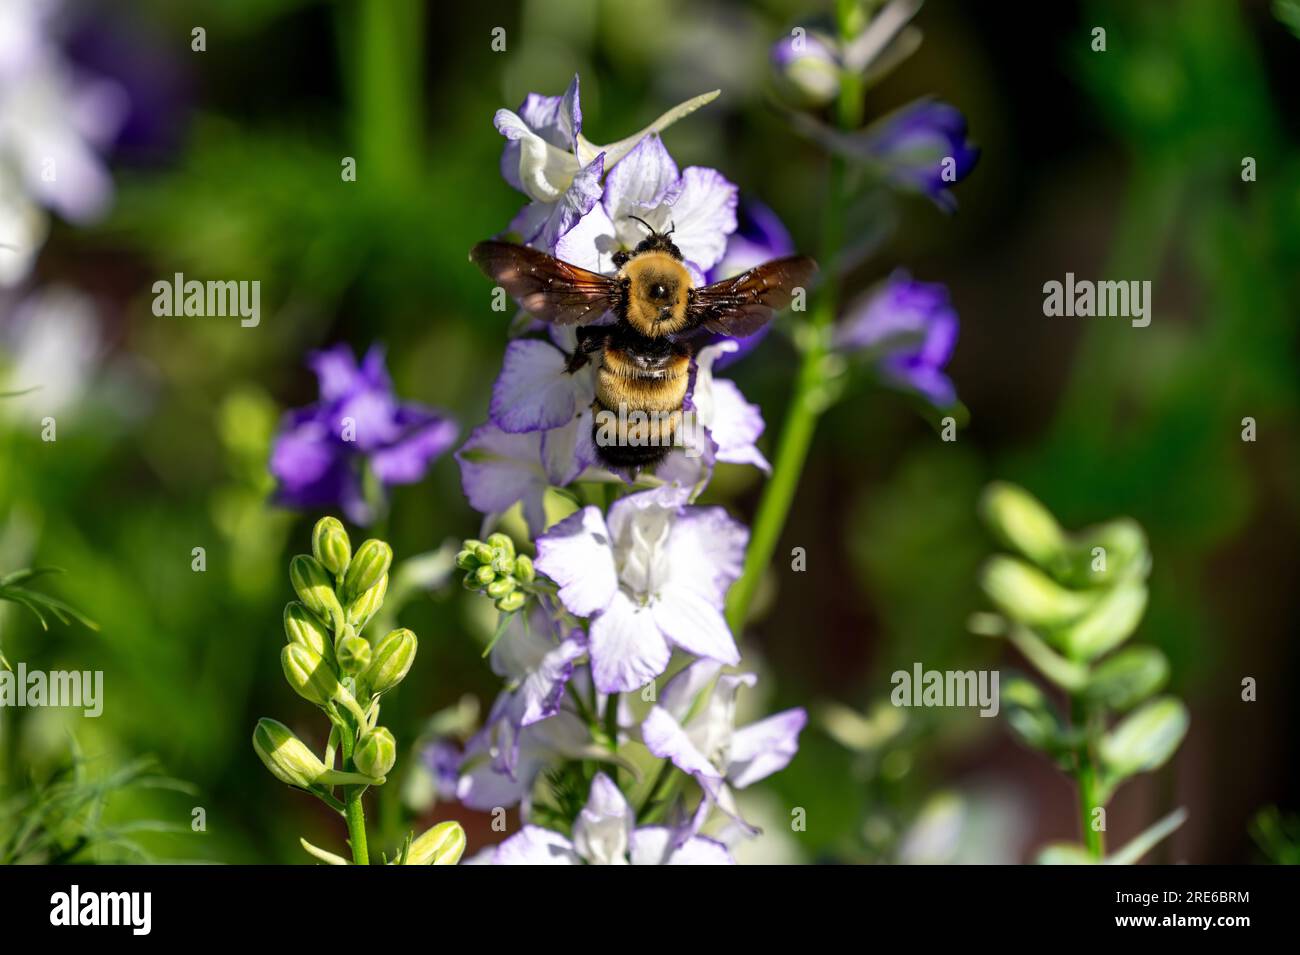 Closeup of a large Bumblebee with open wings hovering by White Larkspur flowers in a Summer garden. Stock Photo